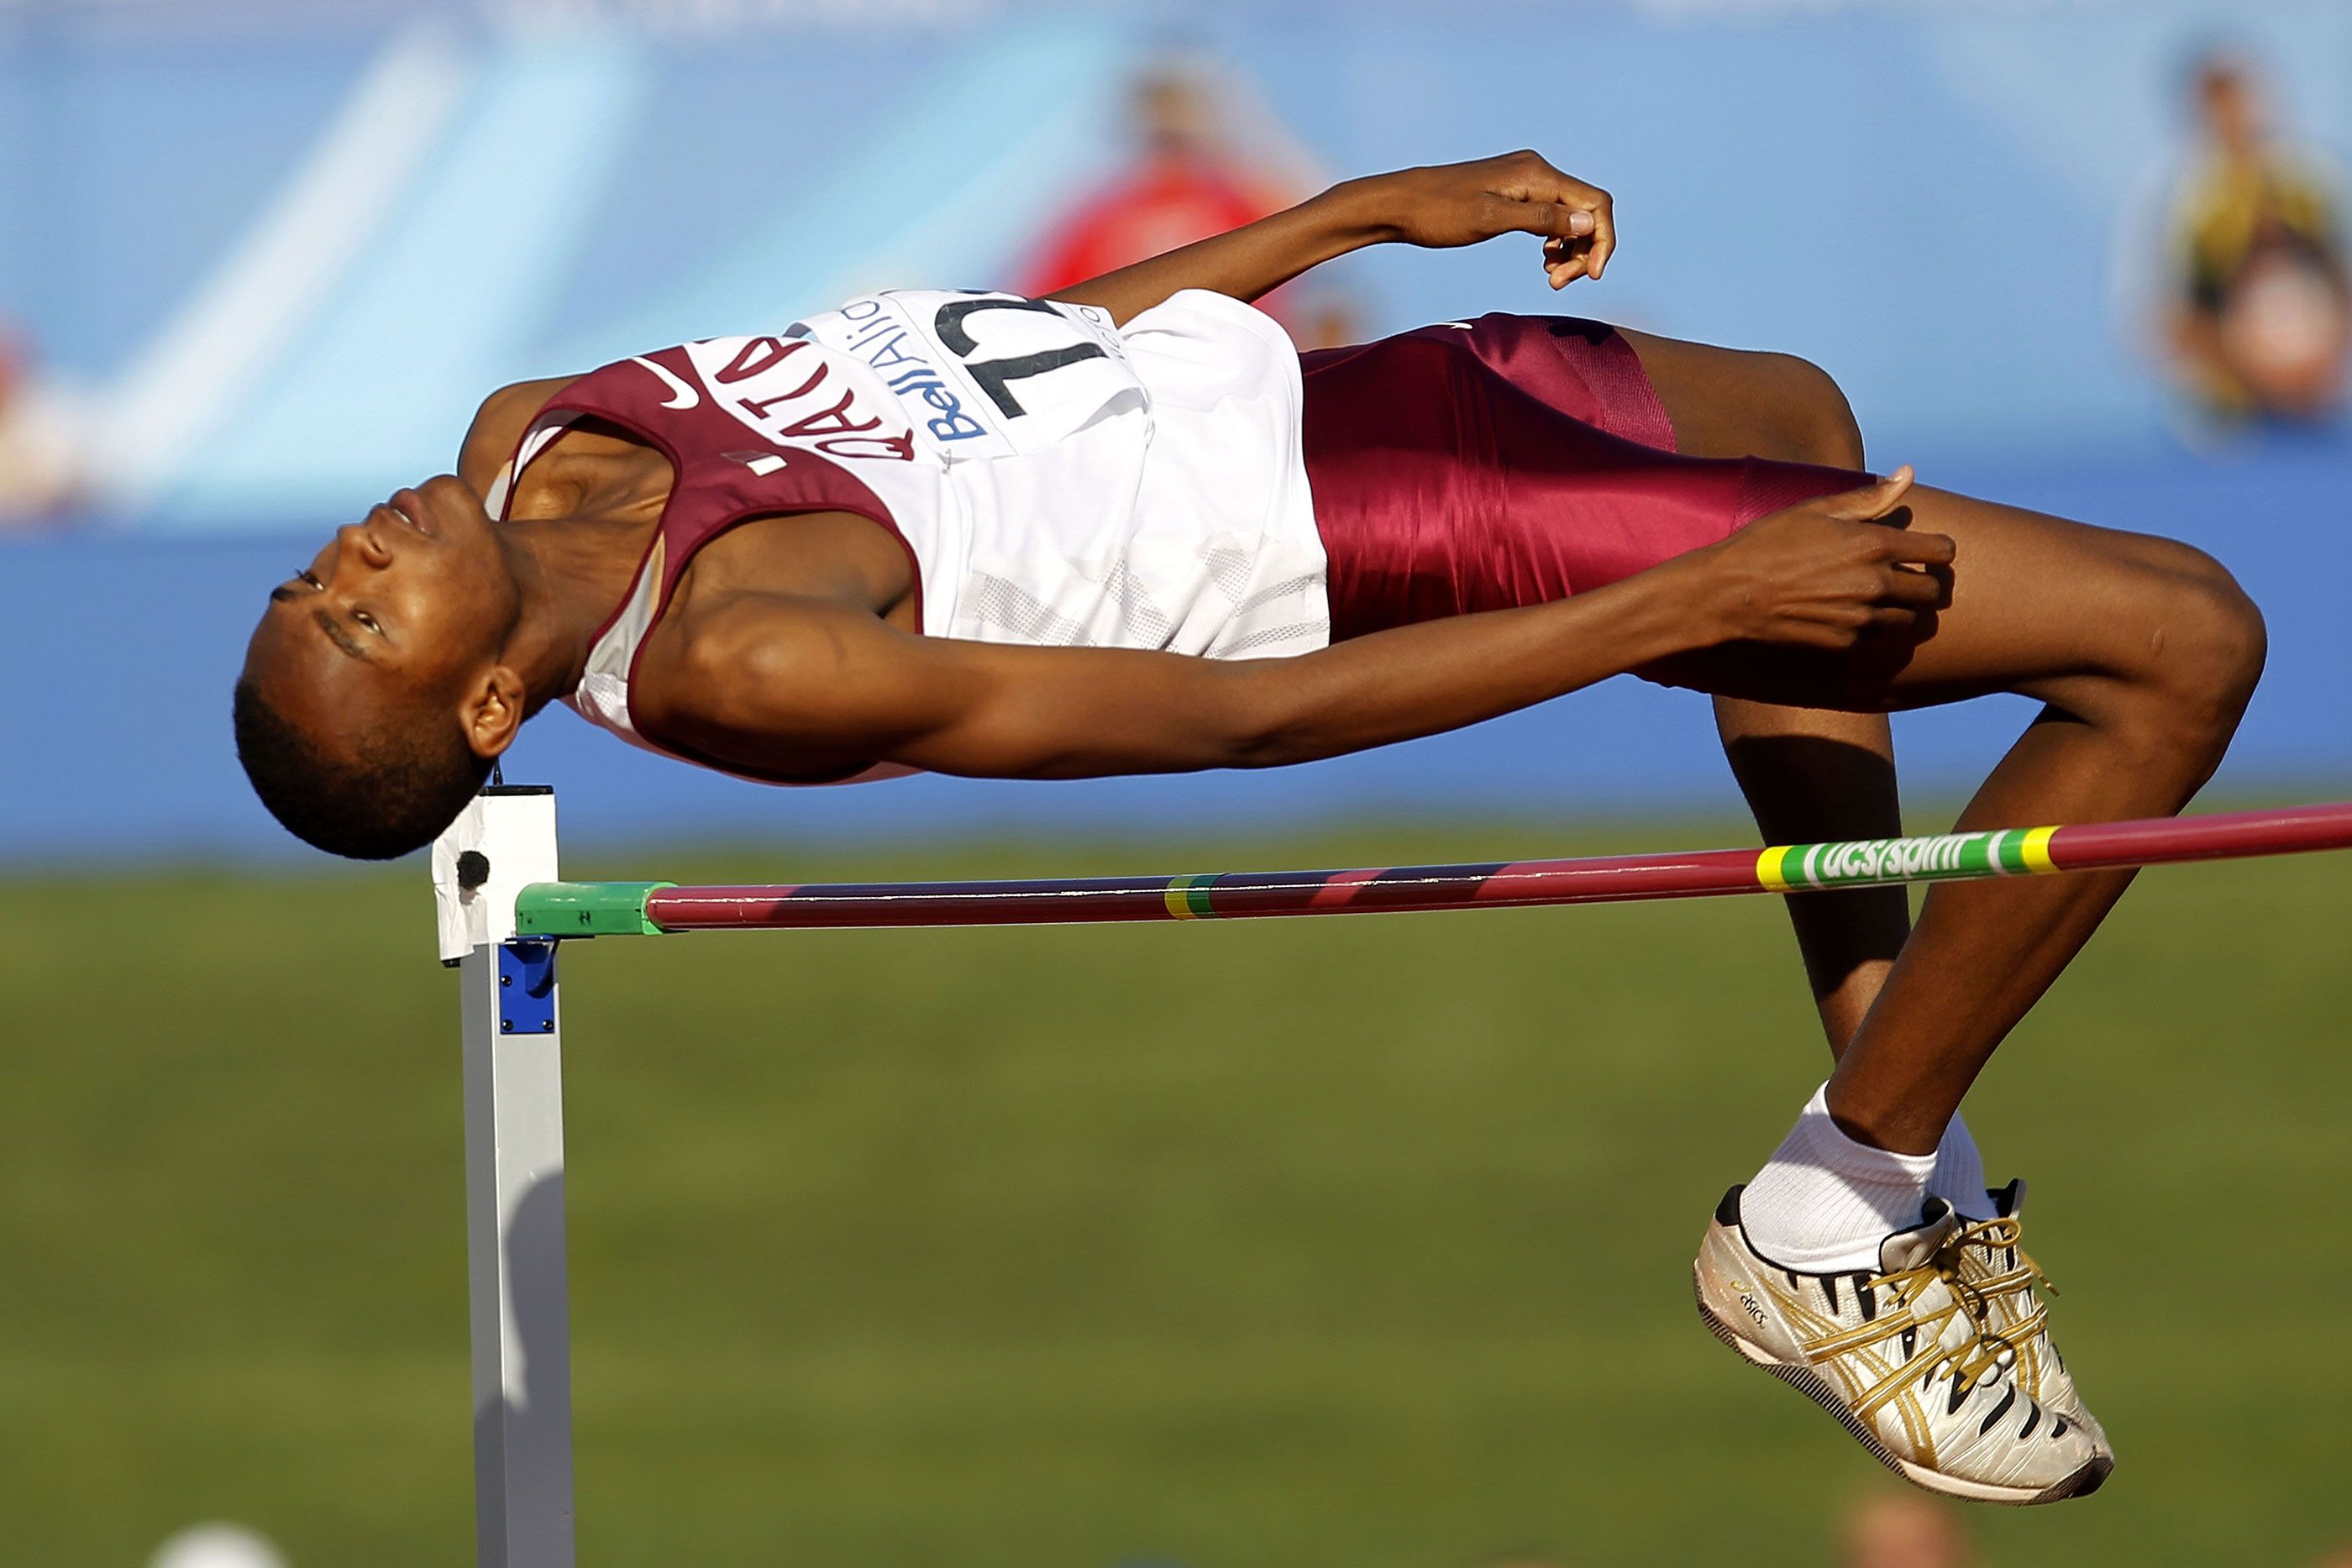 Mutaz Barshim competes at the 2010 World U20 Championships in Moncton